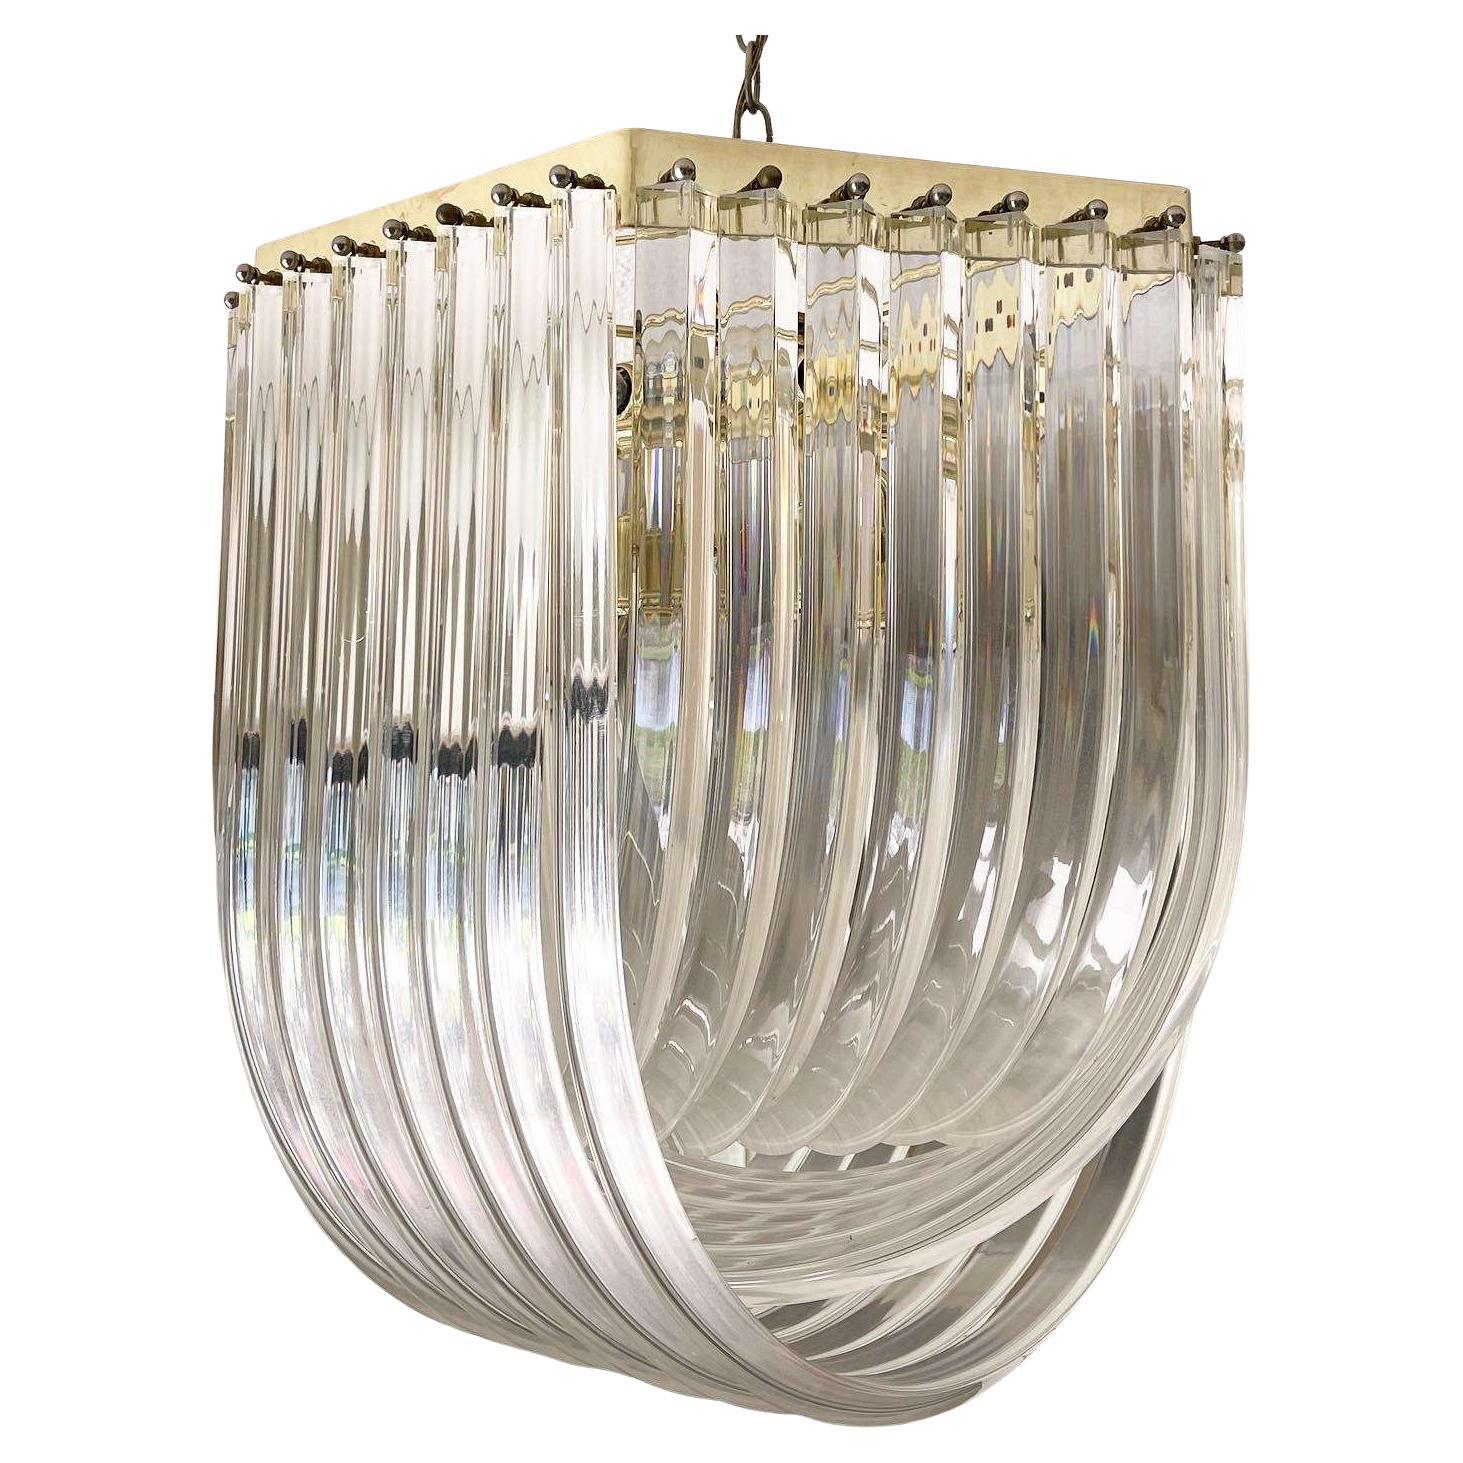 Hollywood Regency Gold Lucite Ribbon Loop Carlo Nason Style Lucite Chandelier For Sale